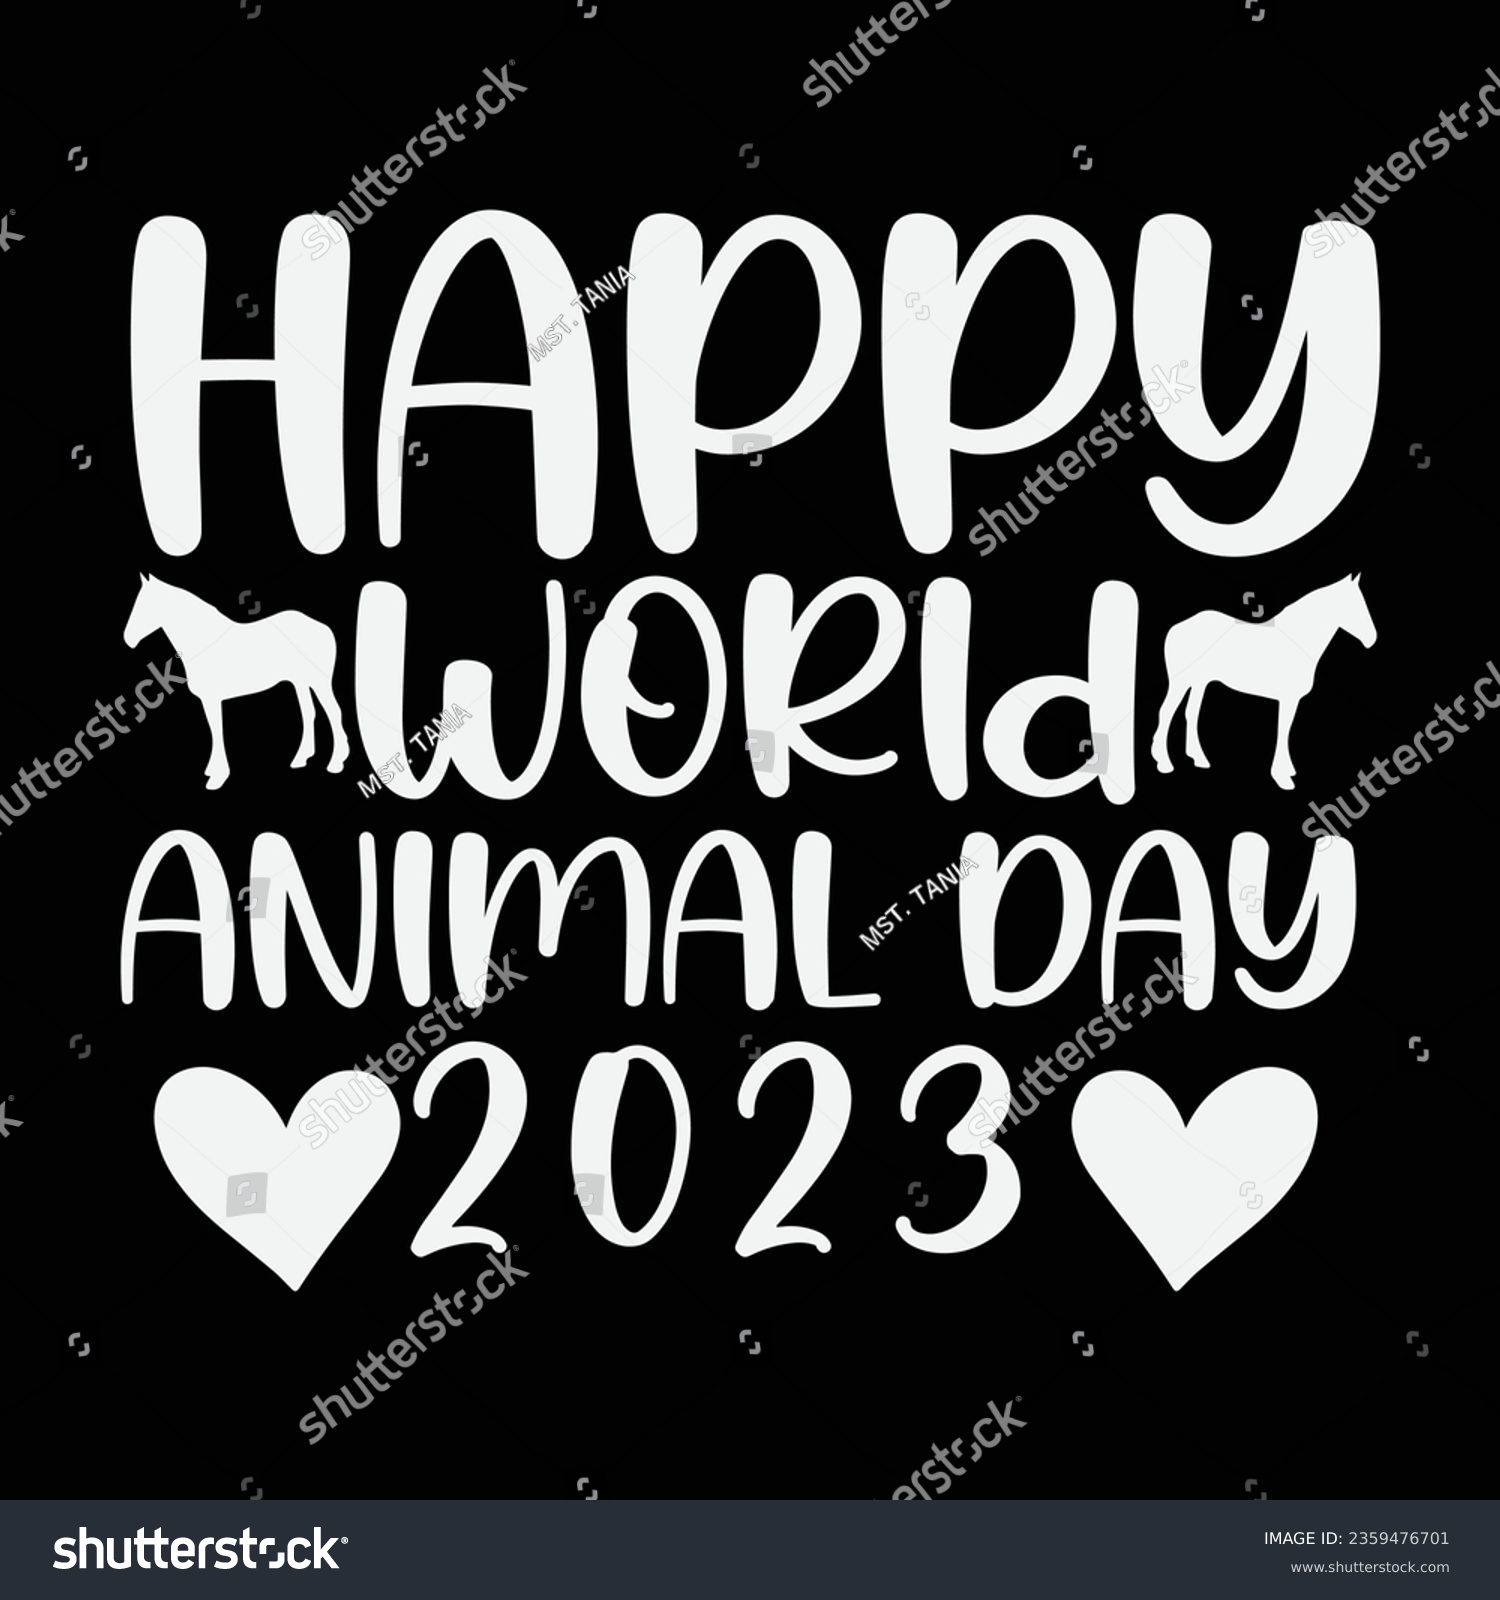 SVG of I love animals so i don't eat them ,Help animals to day t-shirt design,Happy international animal day,The lion svg,Be one less person harming animals ,Wildlife rehab because people are nasty. svg